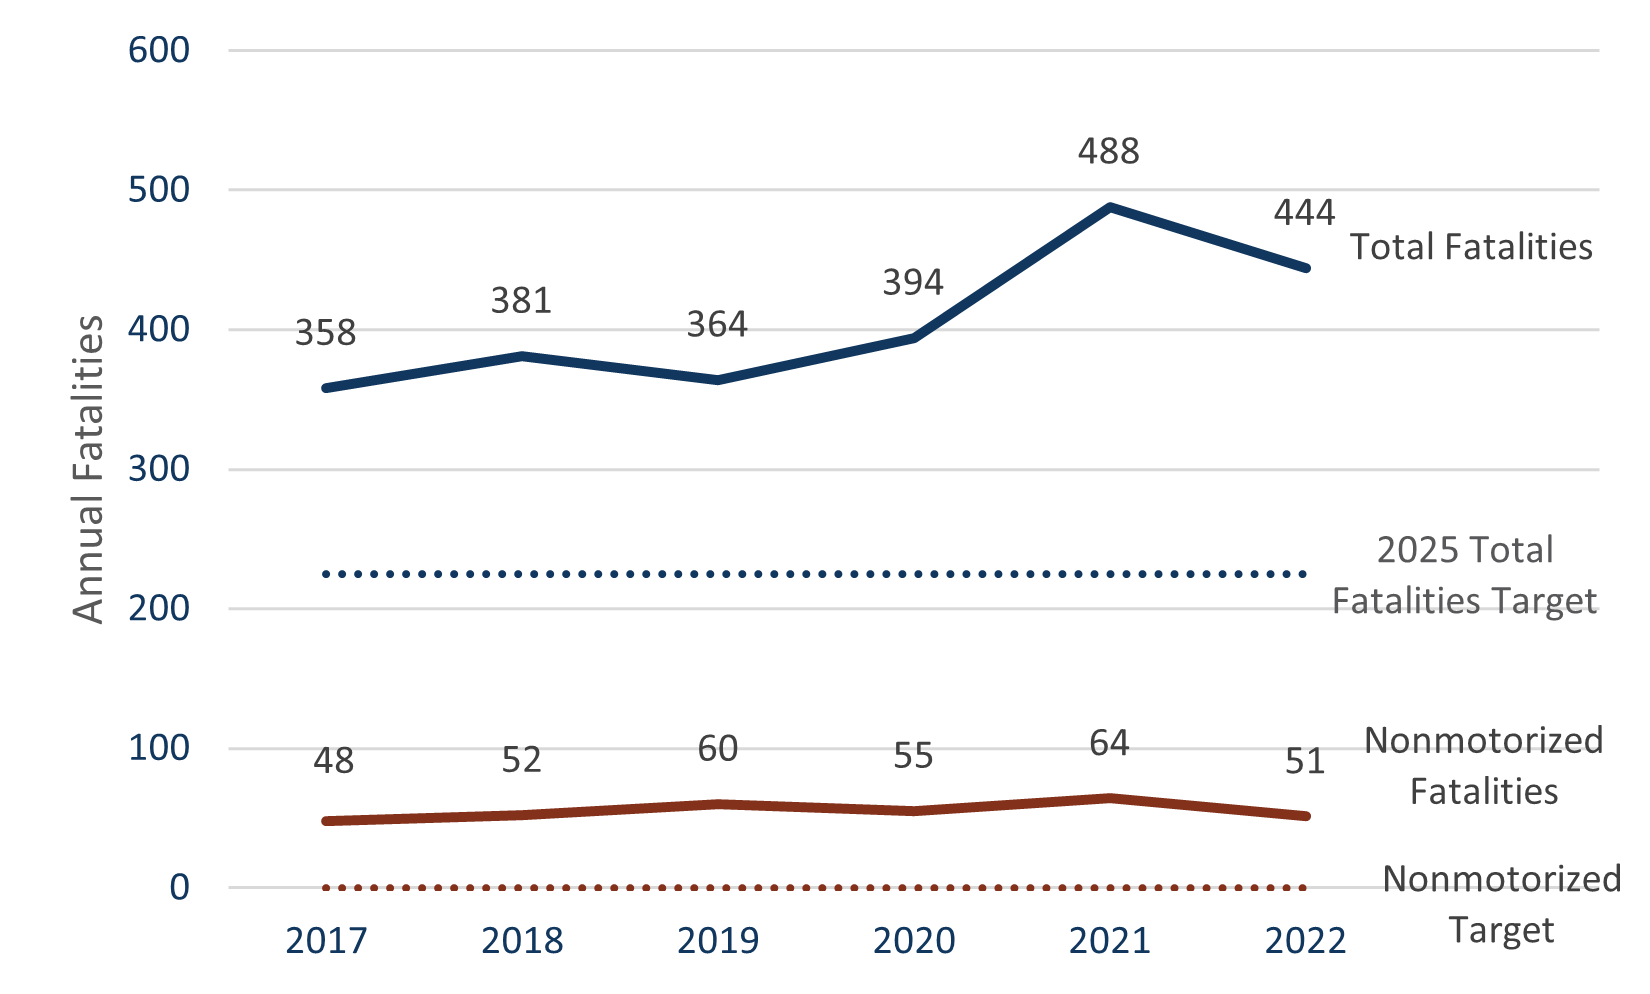 Graph showing Traffic fatalities in Minnesota with a low in 2017 of 358 and a high in 2021 of 488.